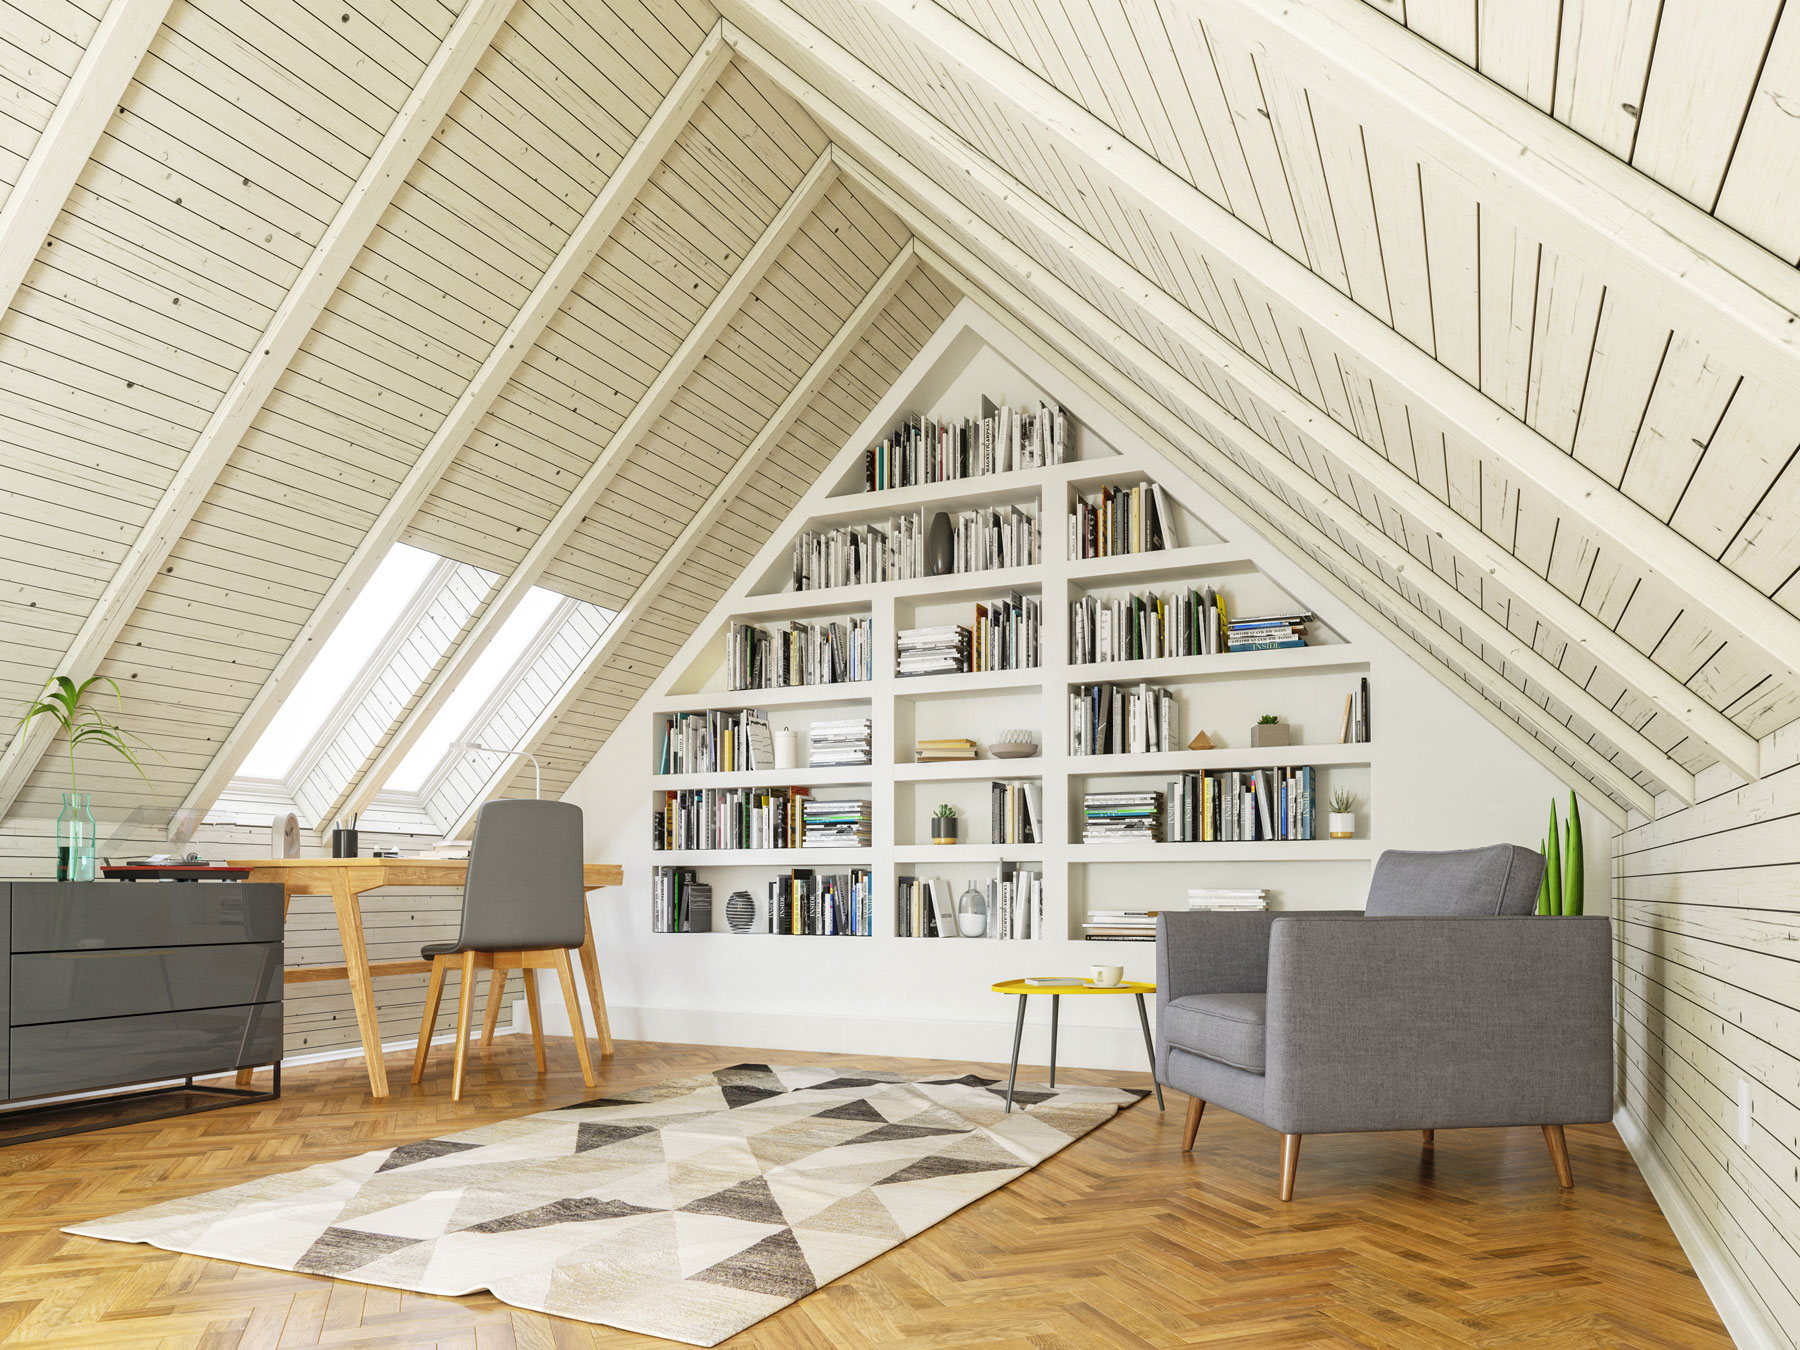 A home library - an attic room with plenty of books